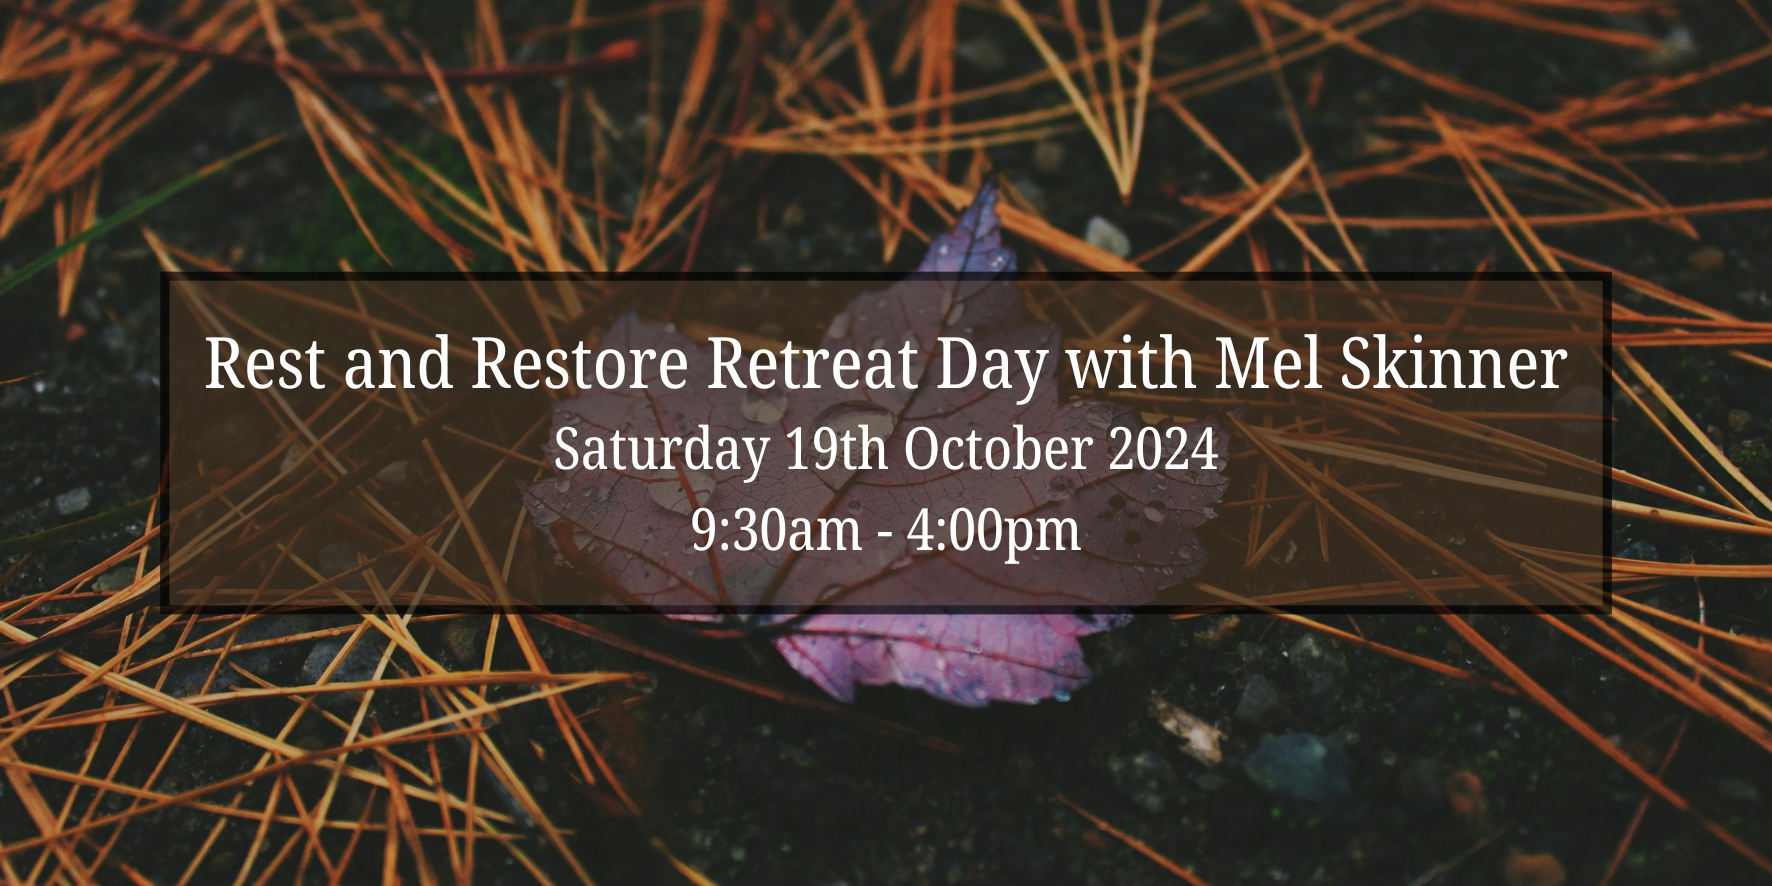 Rest and Restore Retreat Day with Mel Skinner